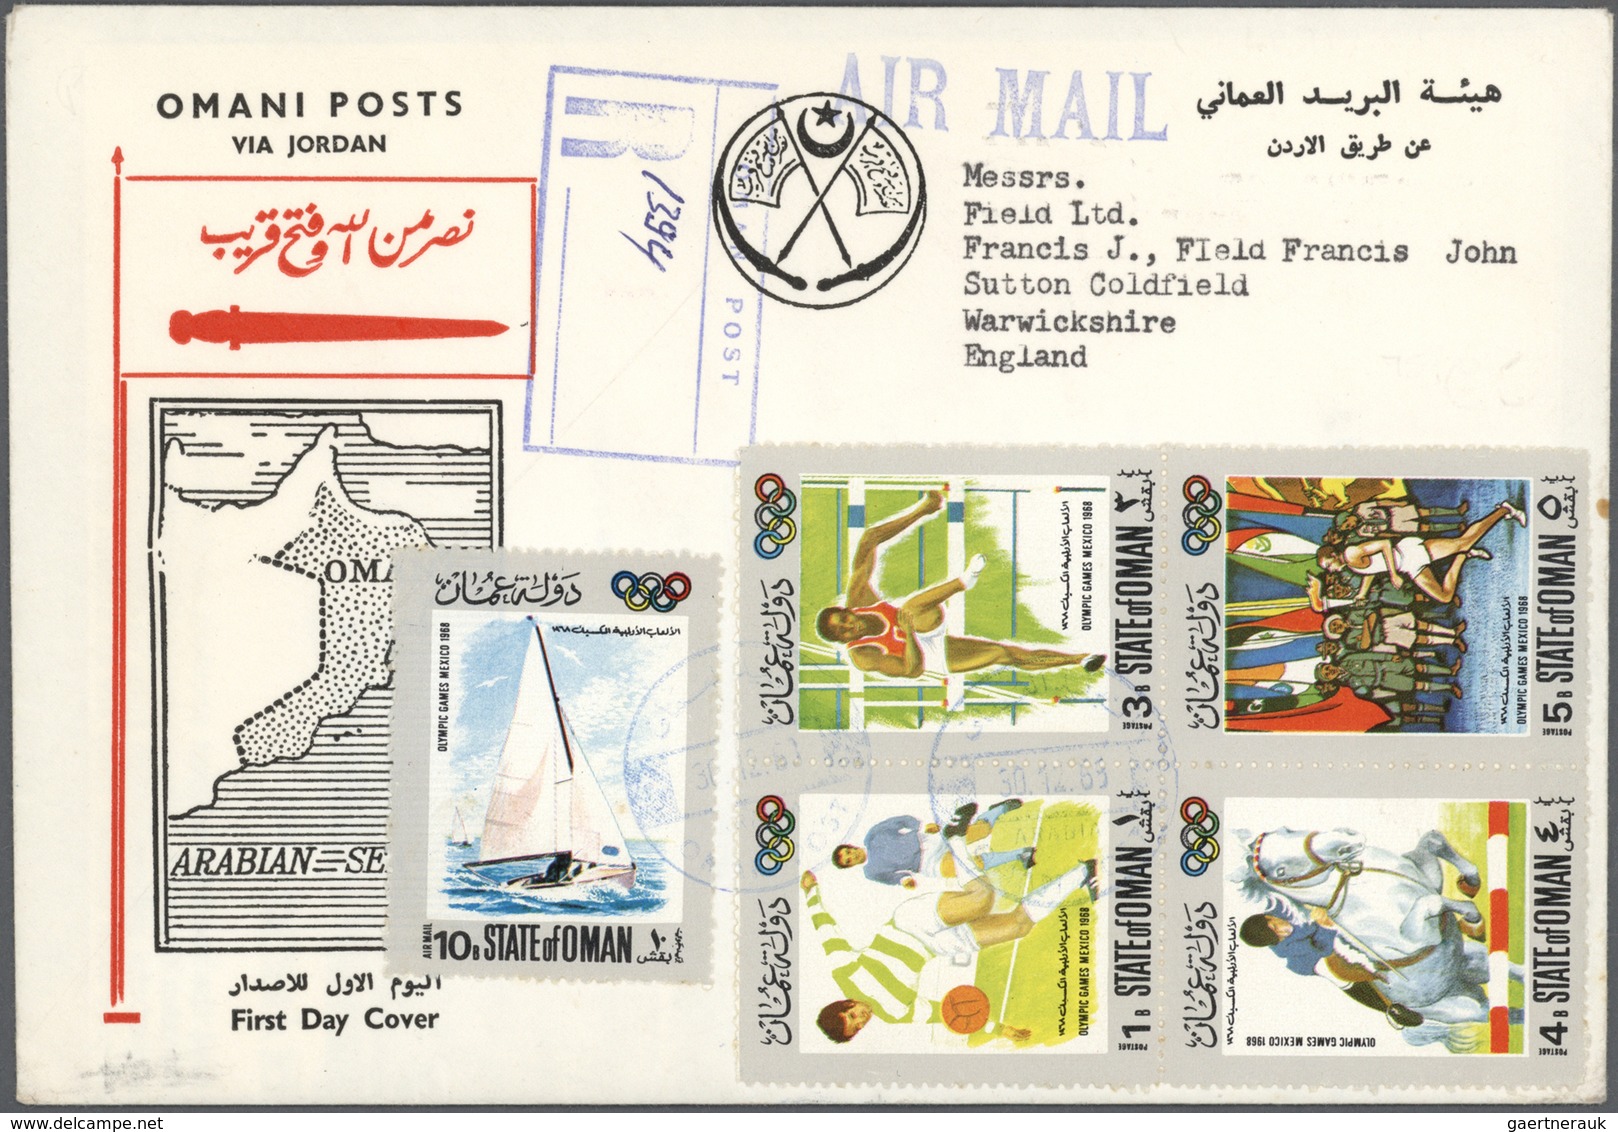 Naher Osten: 1890-1980, 75 covers / cards Near East, French and British Fieldpost, Syria and Lebanon